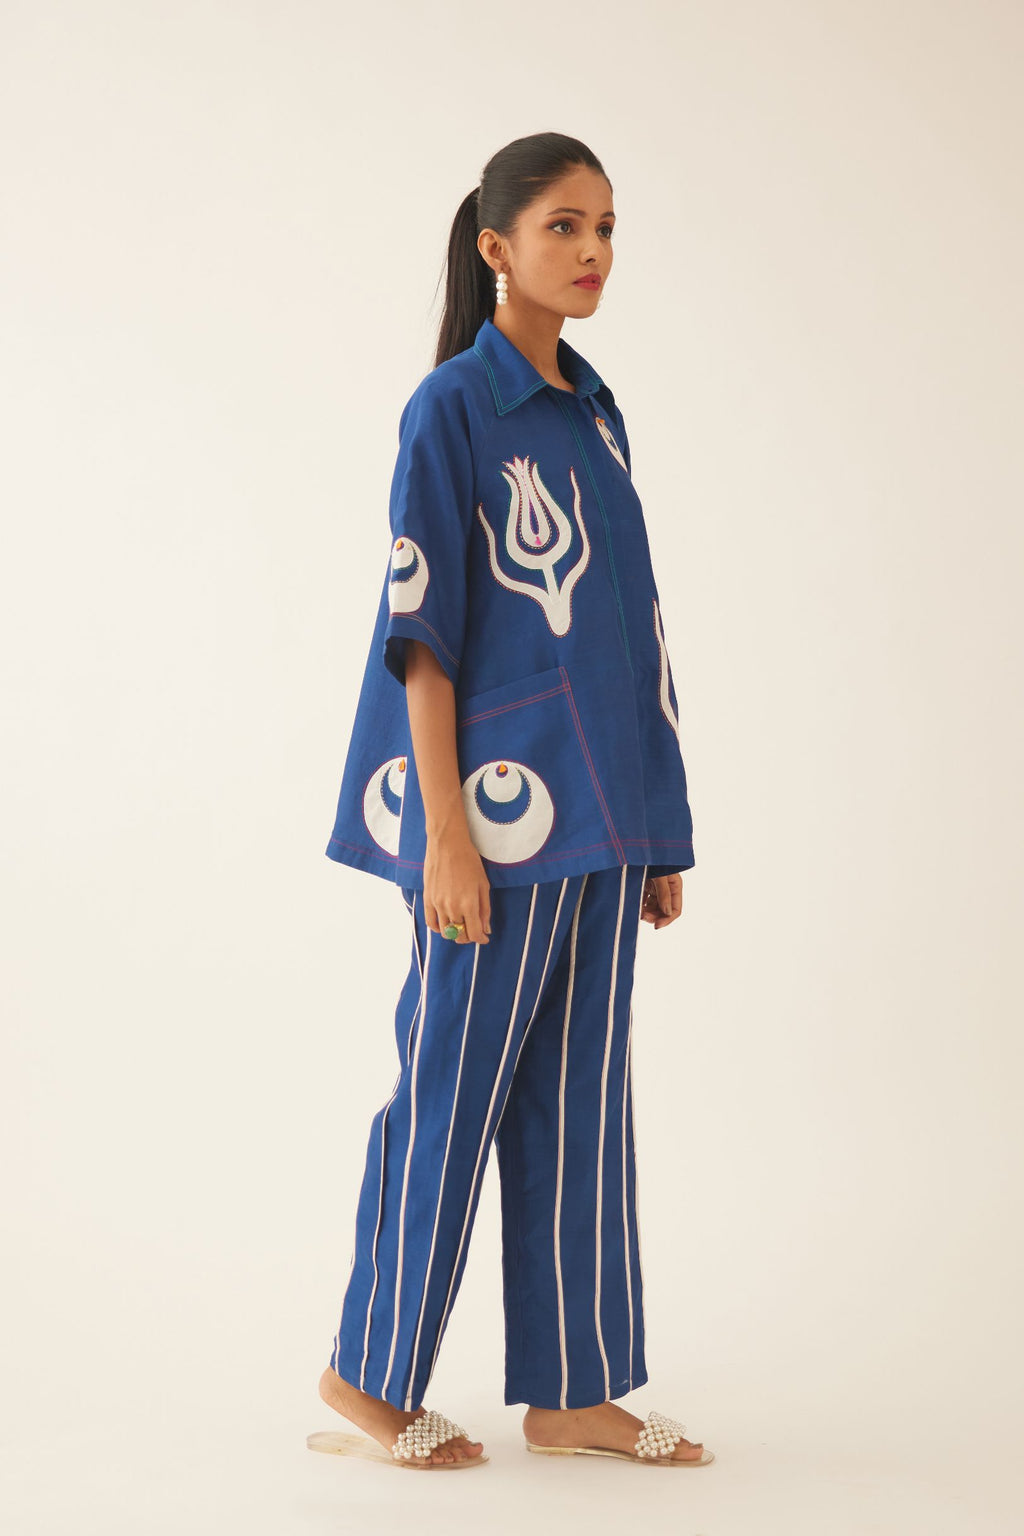 Blue silk chanderi short top with cotton appliqué boota, highlighted with kantha multi colored thread work, paired with blue silk chanderi straight pants with vertical off white piping detail.